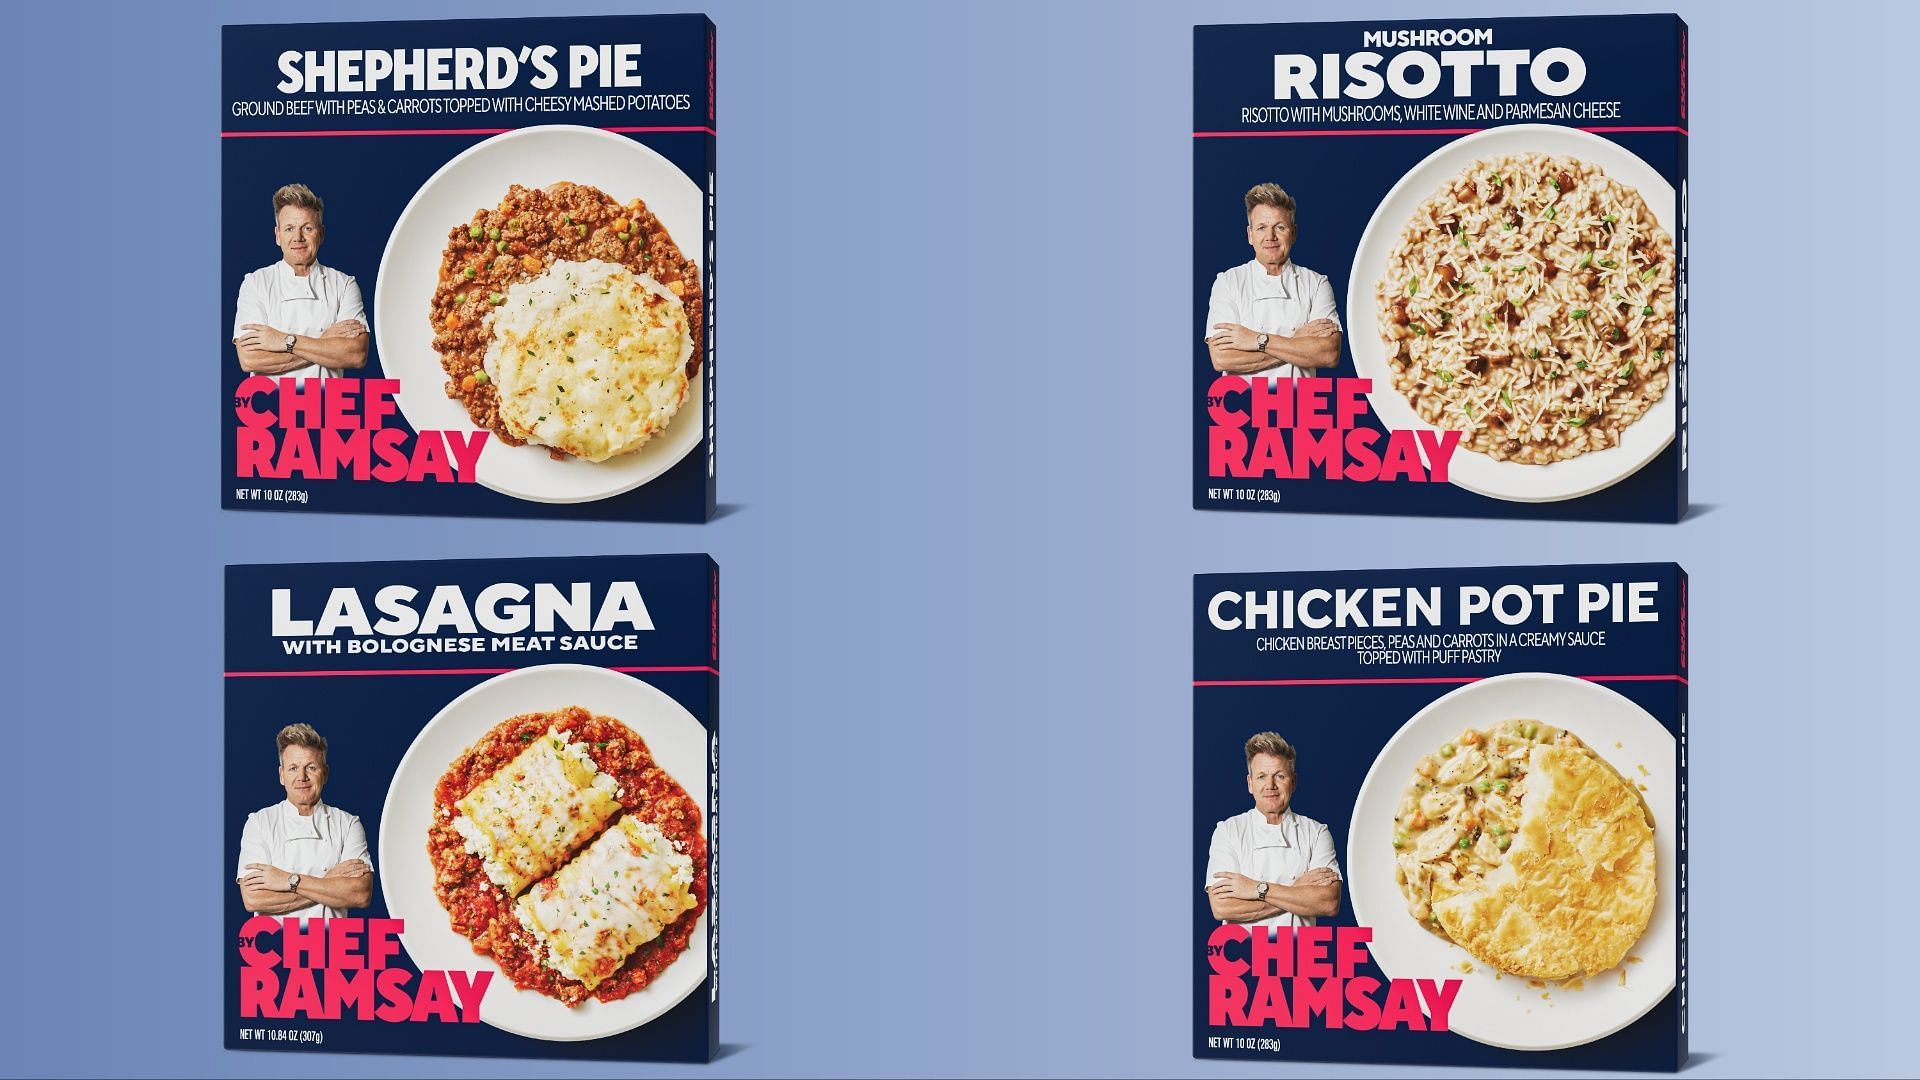 Gordon Ramsay Frozen Food Line: Offerings, price, and all you need to know